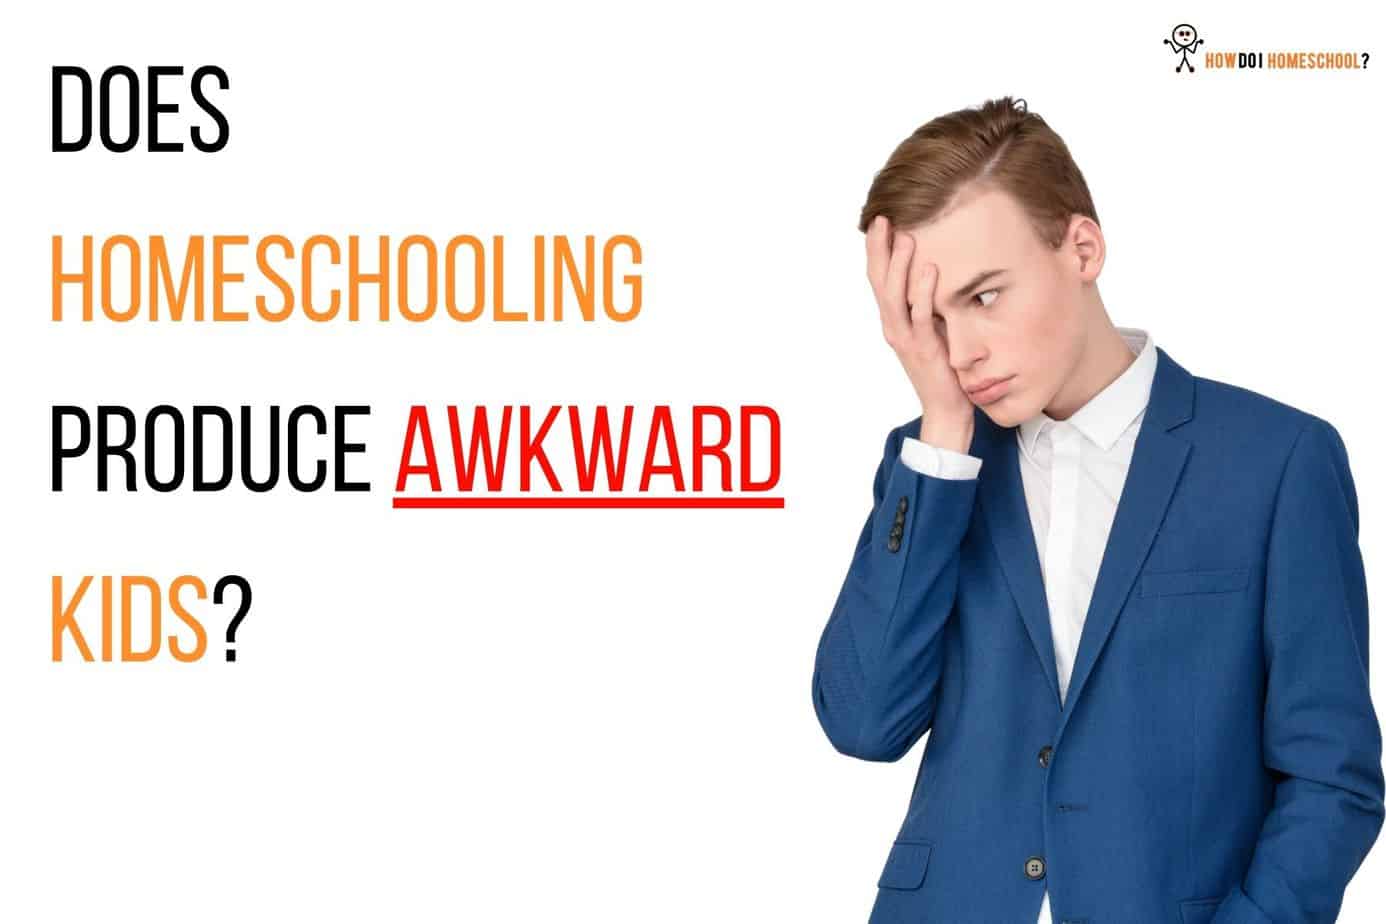 Why Are Homeschoolers Socially Awkward?